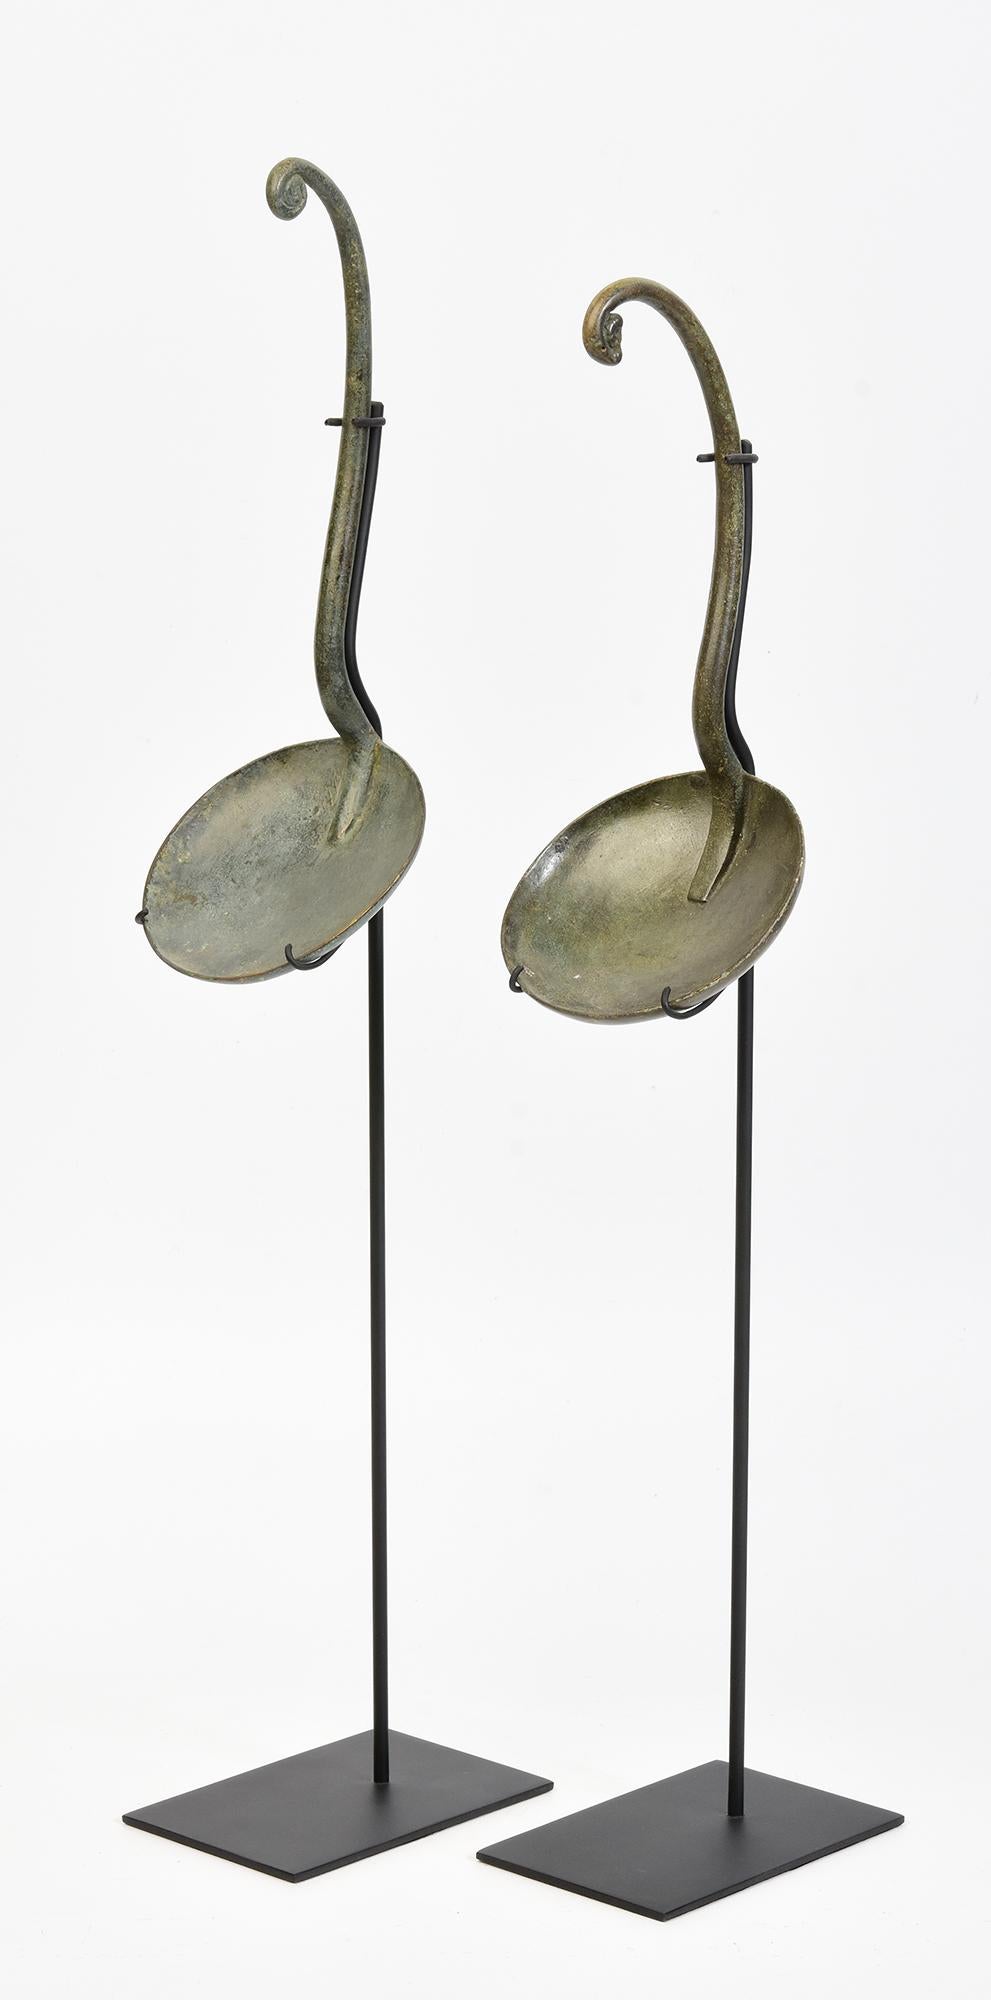 A pair of antique Khmer bronze ritual ladle spoon for holy water with stand.

Age: Cambodia, Angkor Vat Period, 12th Century
Size of each ladle: Length 21.1 - 23.8 C.M. / Width 9.2 - 9.5 C.M.
Size including stand: Height 47.3 - 50.5 C.M.
Condition: